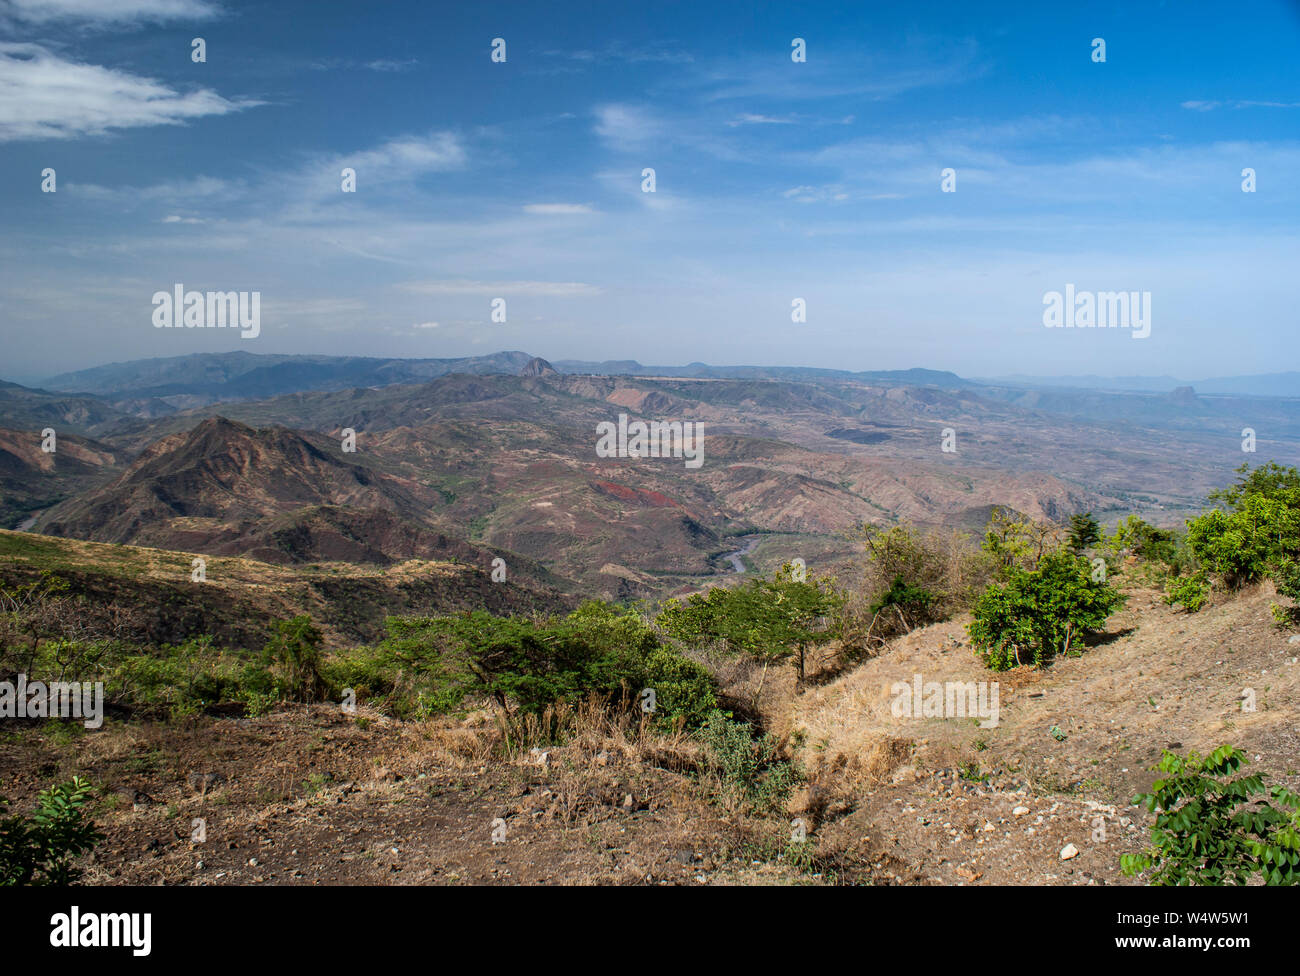 Landscape looking south over Gibe (Omo) river gorge, Ethiopia Stock Photo